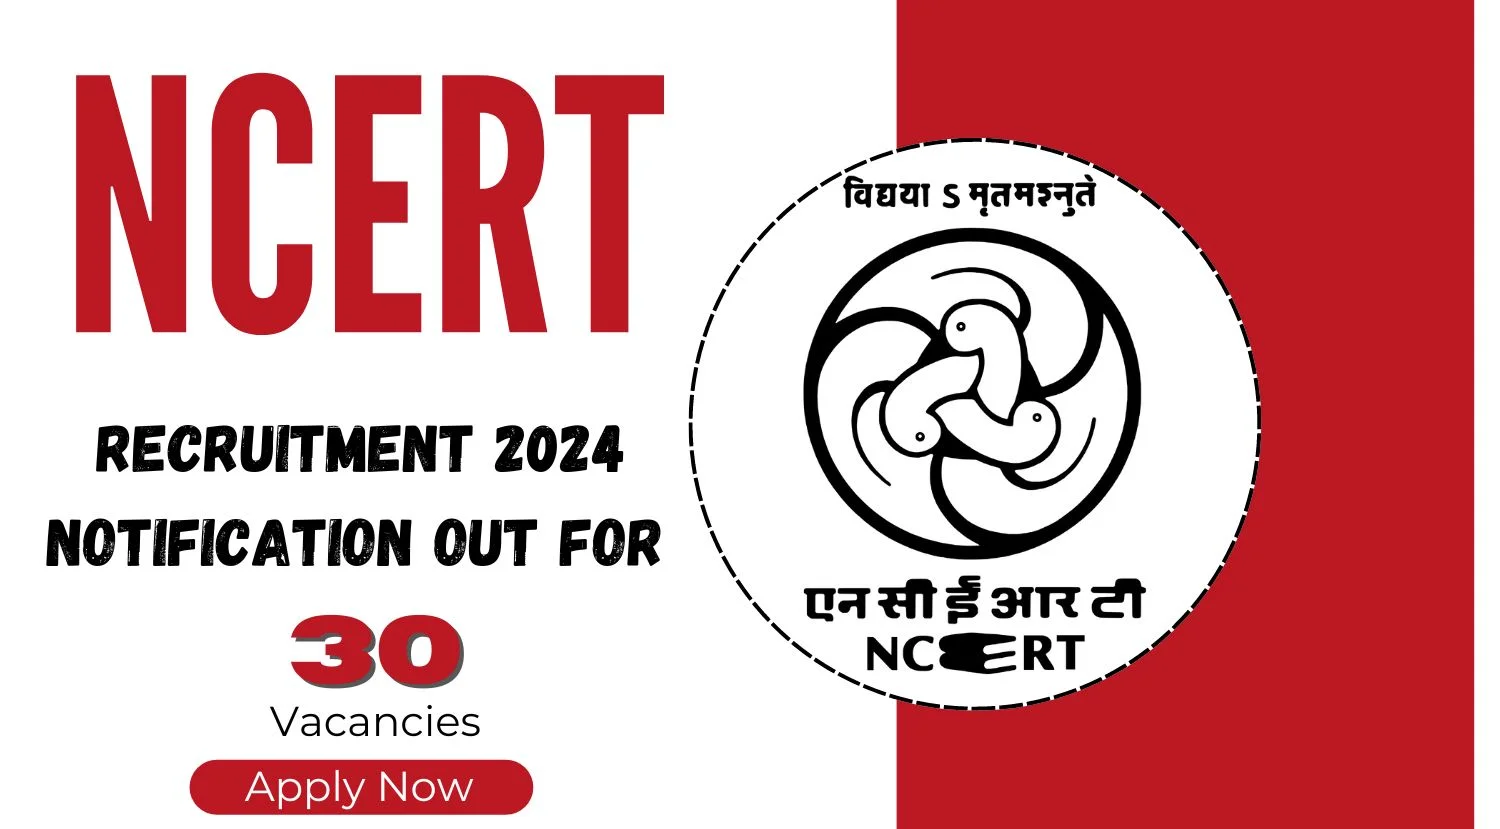 NCERT Recruitment 2024 Notification Out for 30 Vacancies